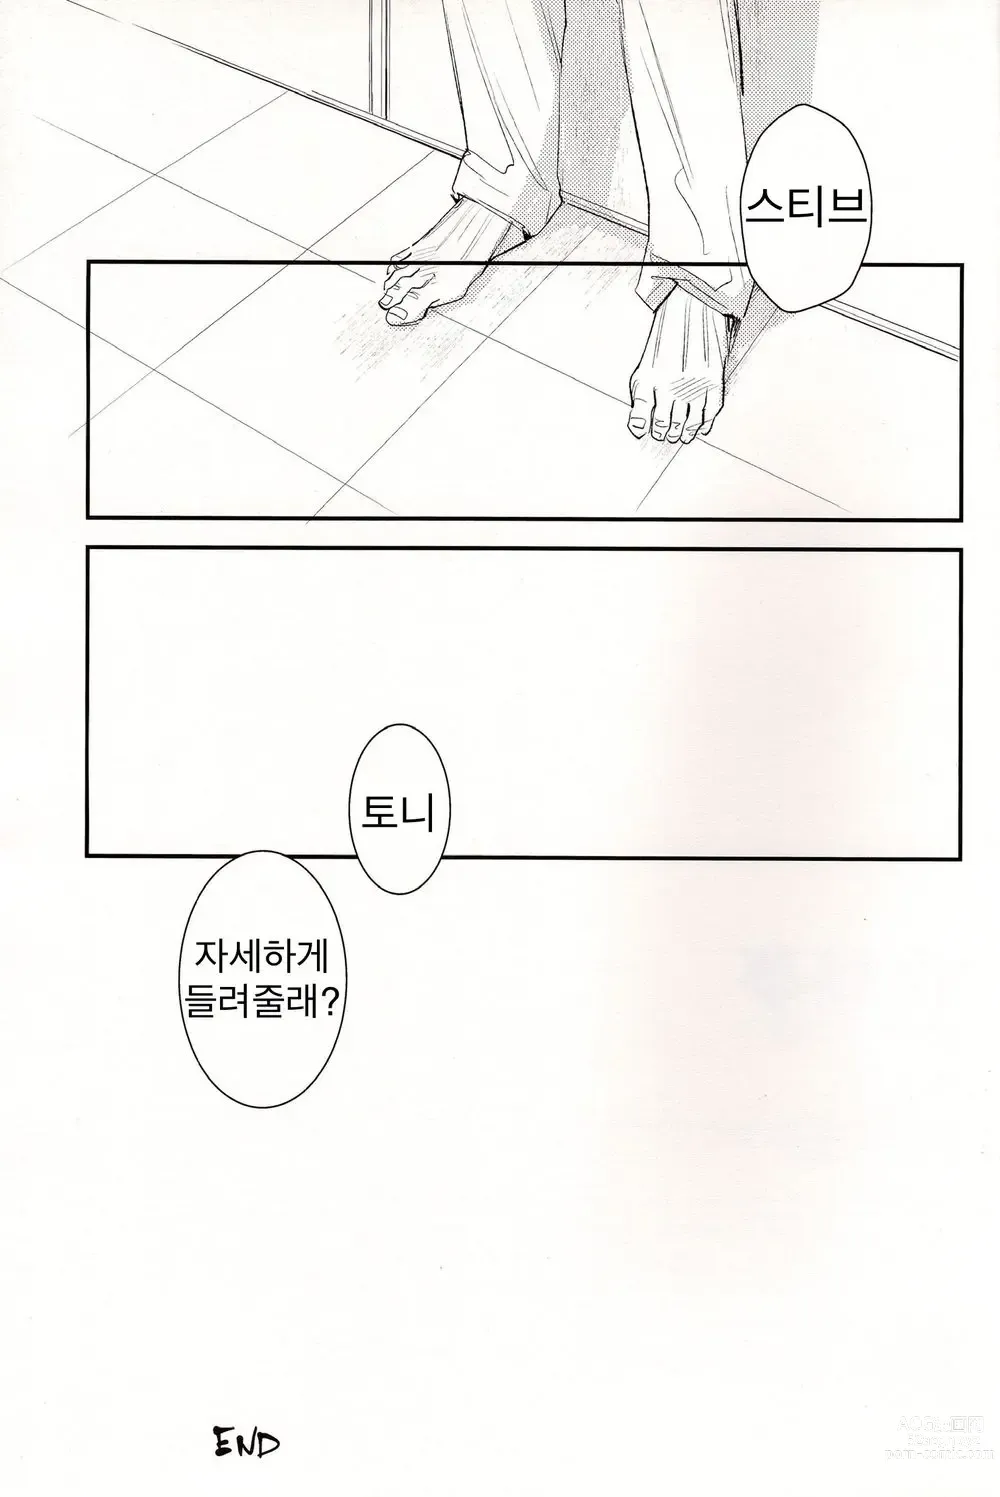 Page 17 of doujinshi Daydream - 백일몽